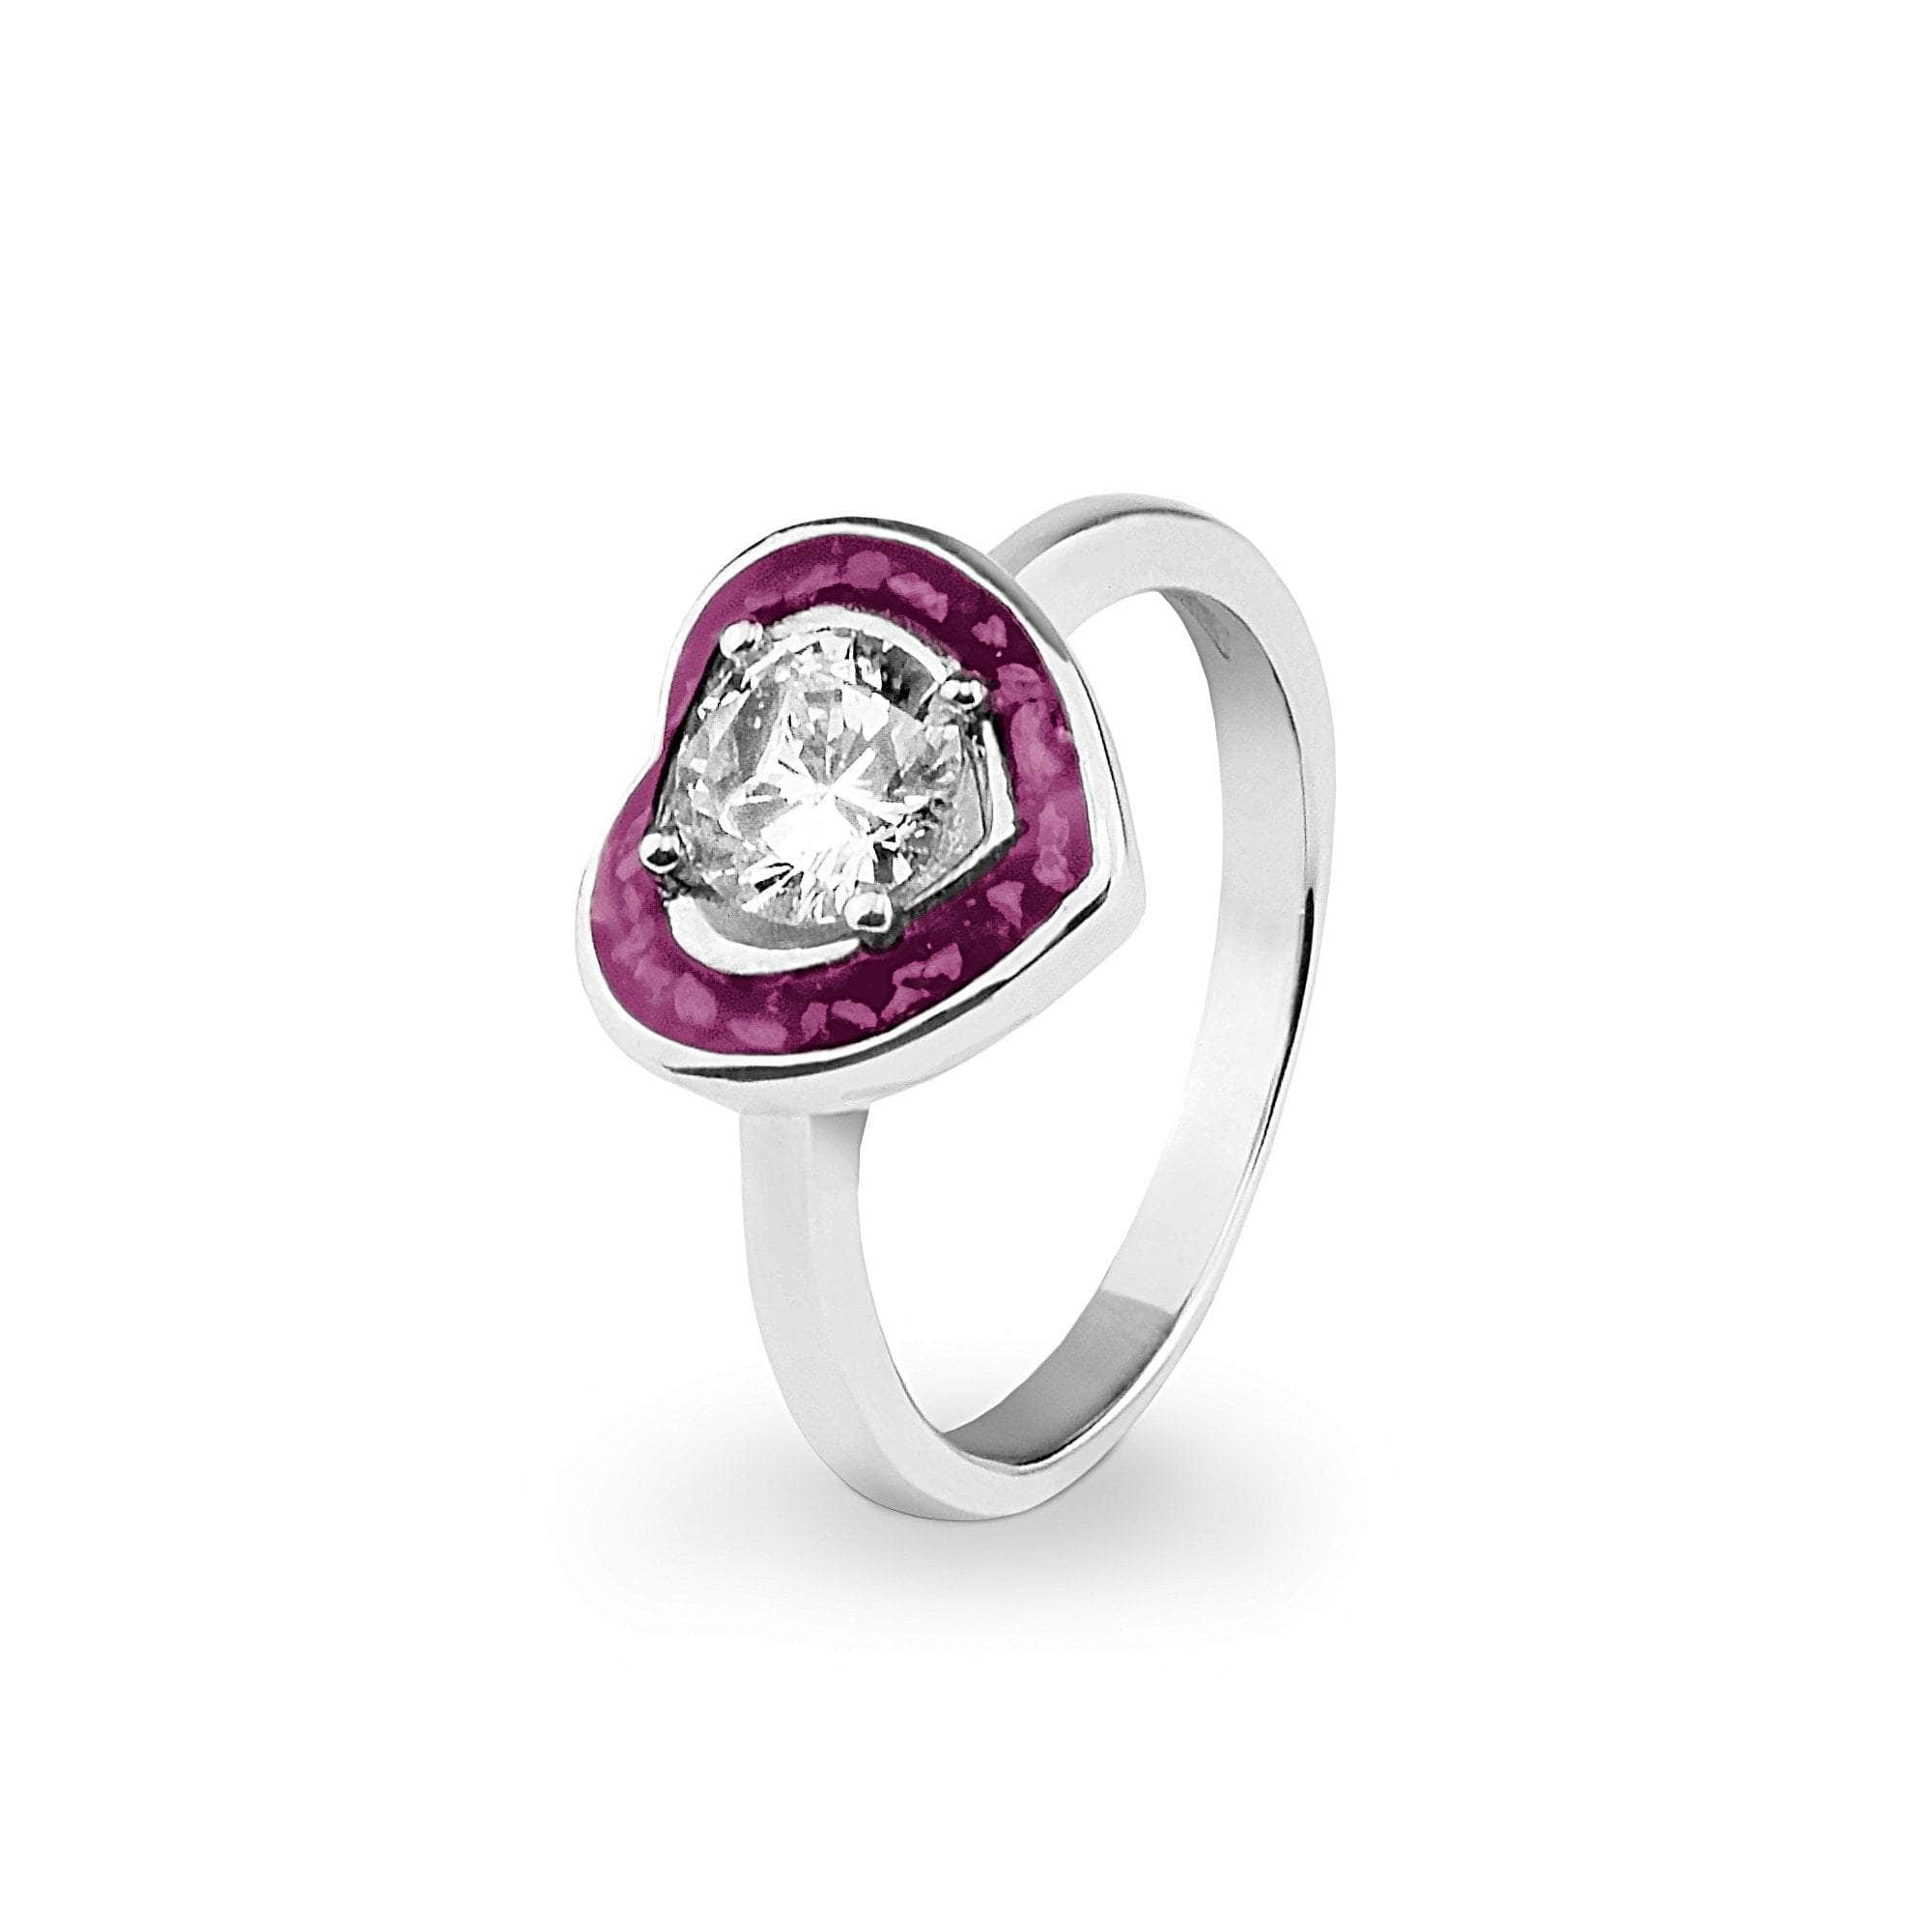 Ladies Beloved Memorial Ashes Ring with Fine Crystal